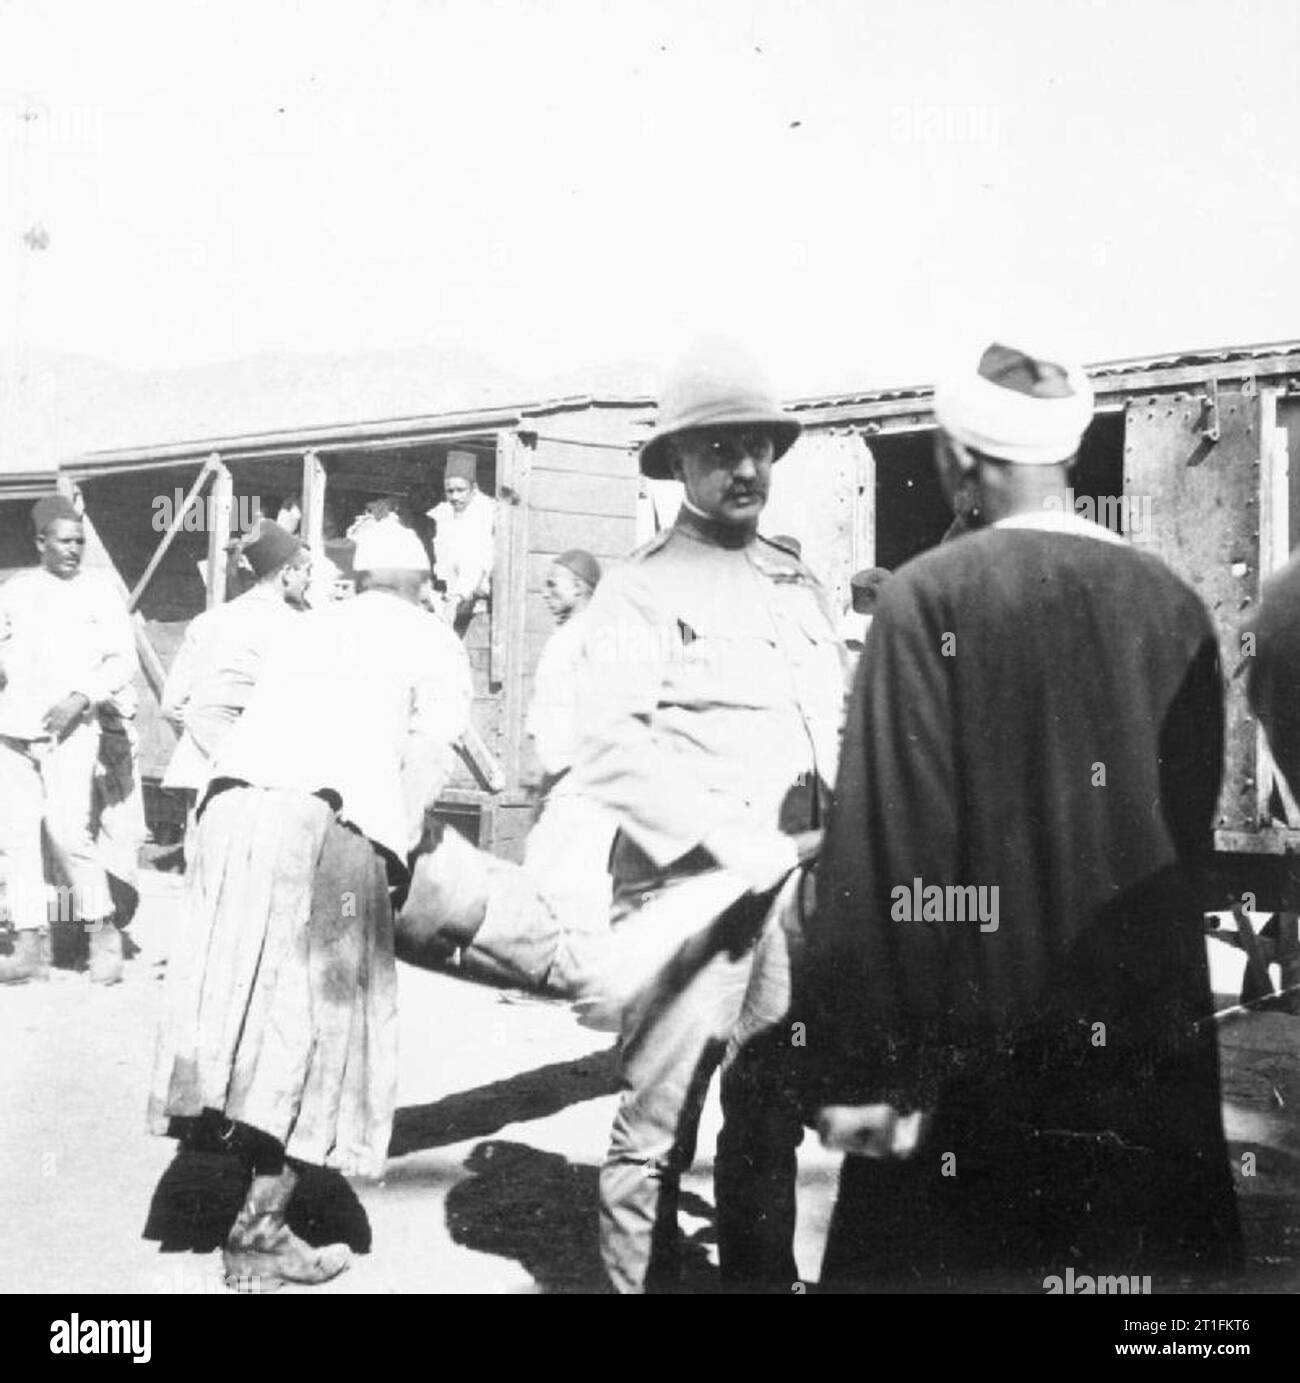 General Kitchener and the Anglo-egyptian Nile Campaign, 1898 The Director of Military Intelligence, Colonel Sir Francis Wingate, talking to an Arab civilian on leaving a train on the Sudan Military Railway, possibly near Atbara. Colonel Wingate spoke fluent Arabic. The Arab is probably Mohammed Fadl, a Sudanese spy from Dafur who was imprisoned and mutilated by the Khalifa. His right hand and left foot had been amputated as punishment. Stock Photo